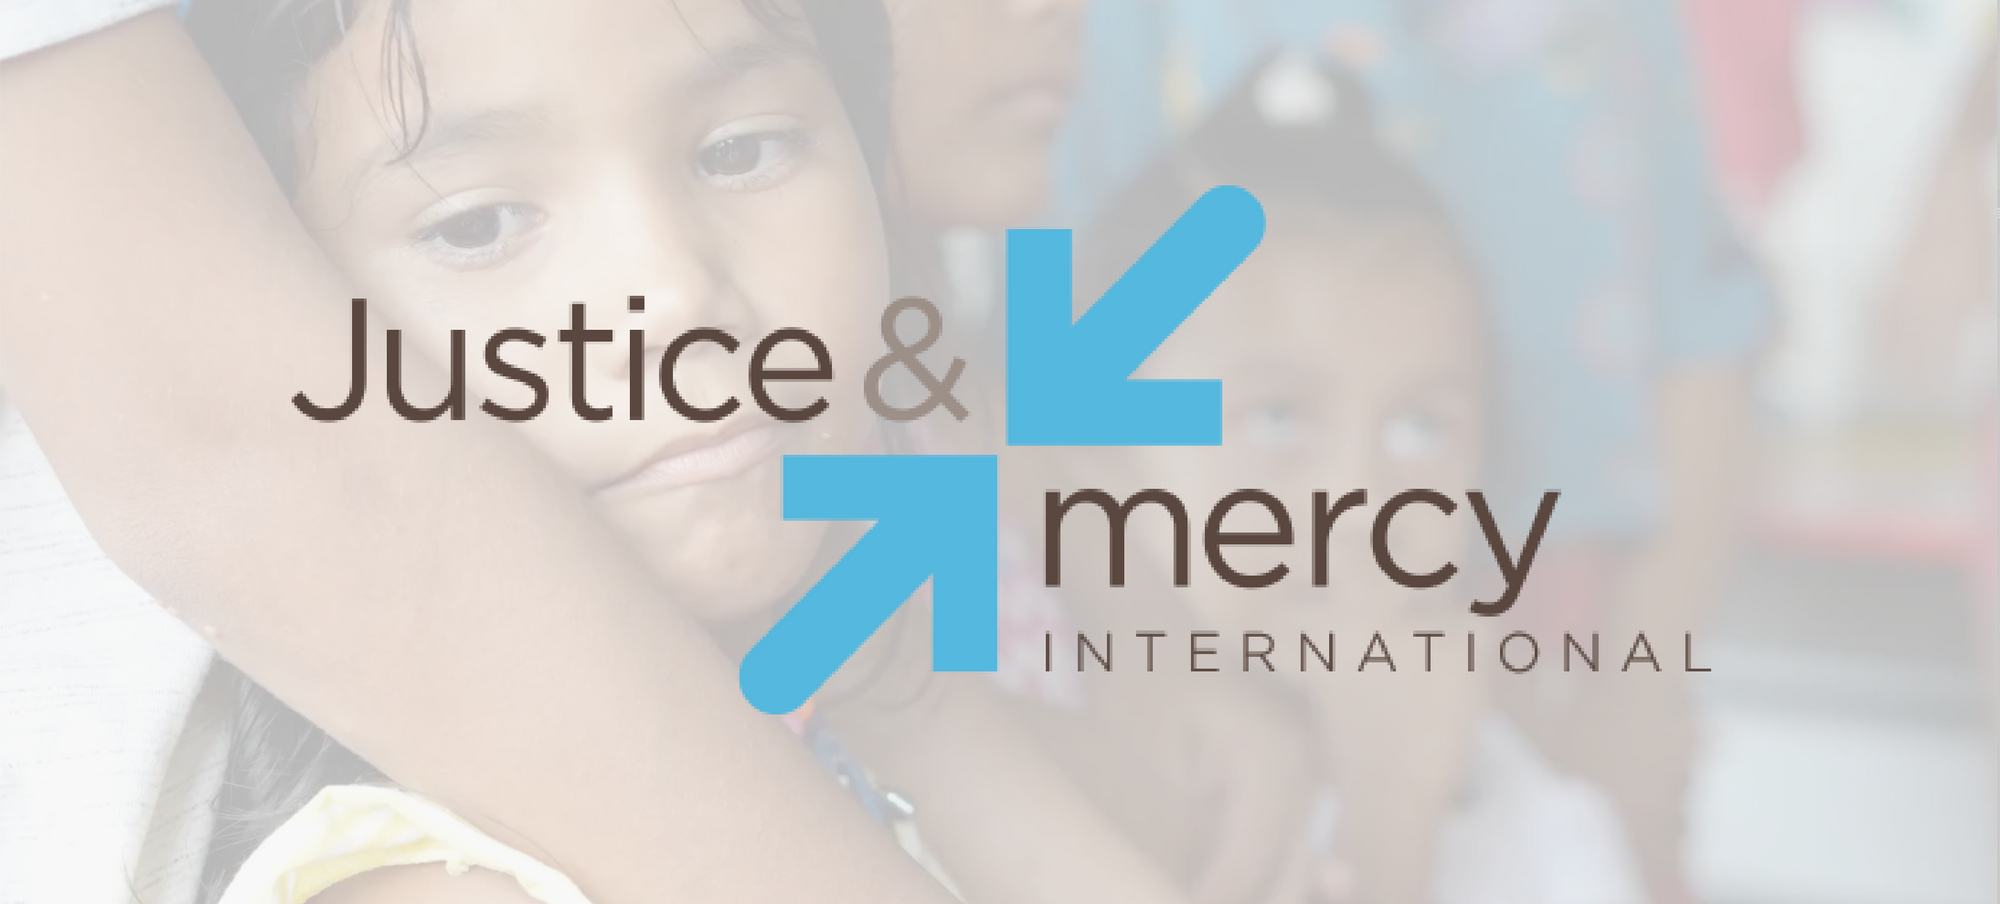 Justice and Mercy International logo, with whitewash photo of young girl in background.